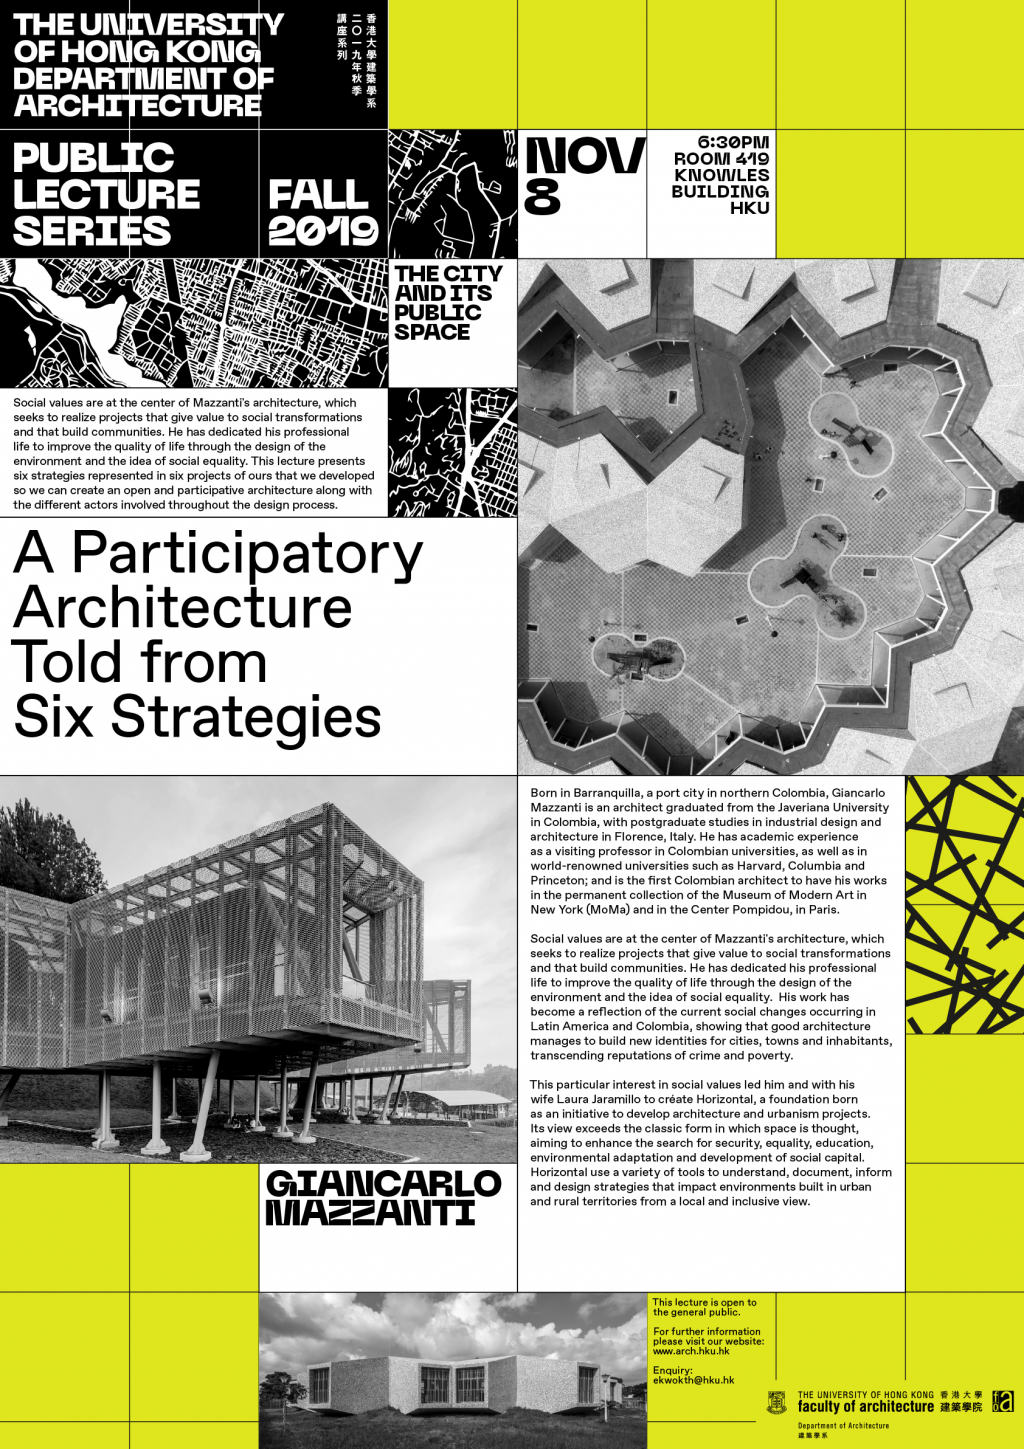 HKU Architecture Public Lecture : 'A Participatory Architecture Told From Six Strategies' by Giancarlo Mazzanti